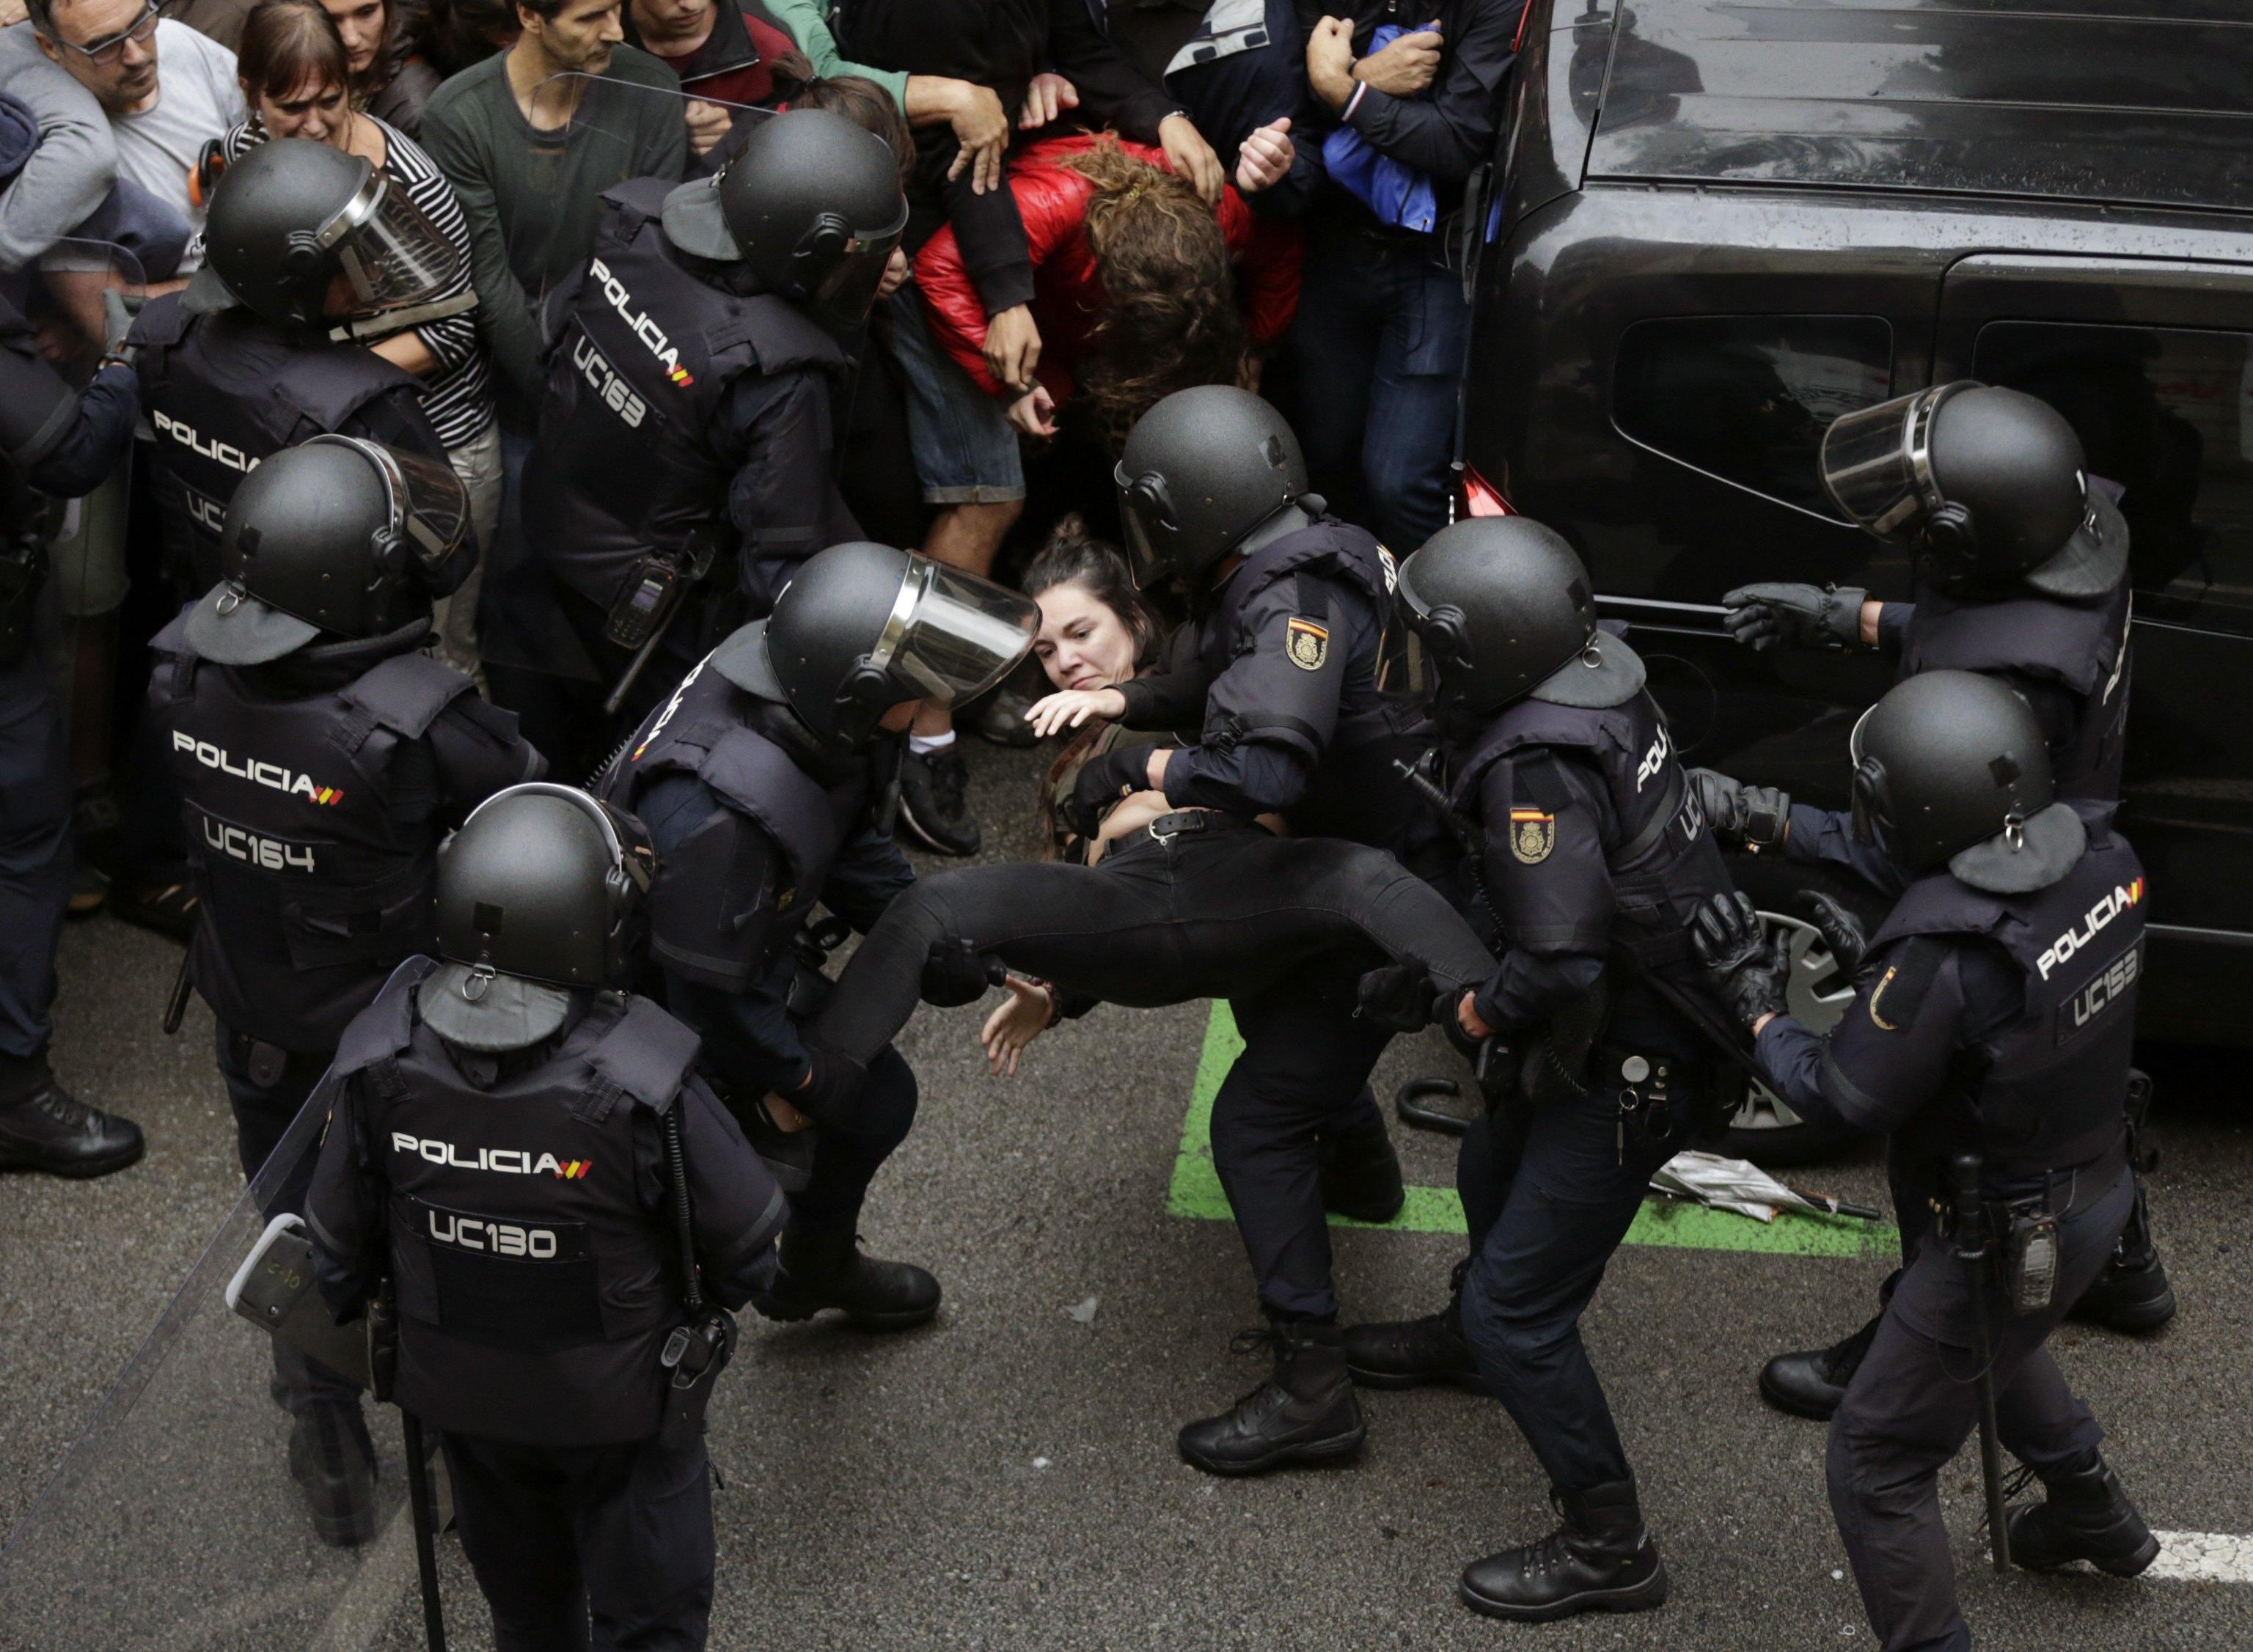 Spanish National riot policemen evict a young woman during clashes between the people gathered outside the Ramon Llull school and police forces during the '1-O Referendum' in Barcelona, Catalonia, on 01 October 2017. National Police officers and Civil guards have been deployed in Barcelona to prevent the people from entering to the polling centers and vote in the Catalan independence referendum, that has been banned by the Spanish Constitutional Court. The police action has provocked clashes between pro-independence people and the police forces.  EPA/Alberto Estevez